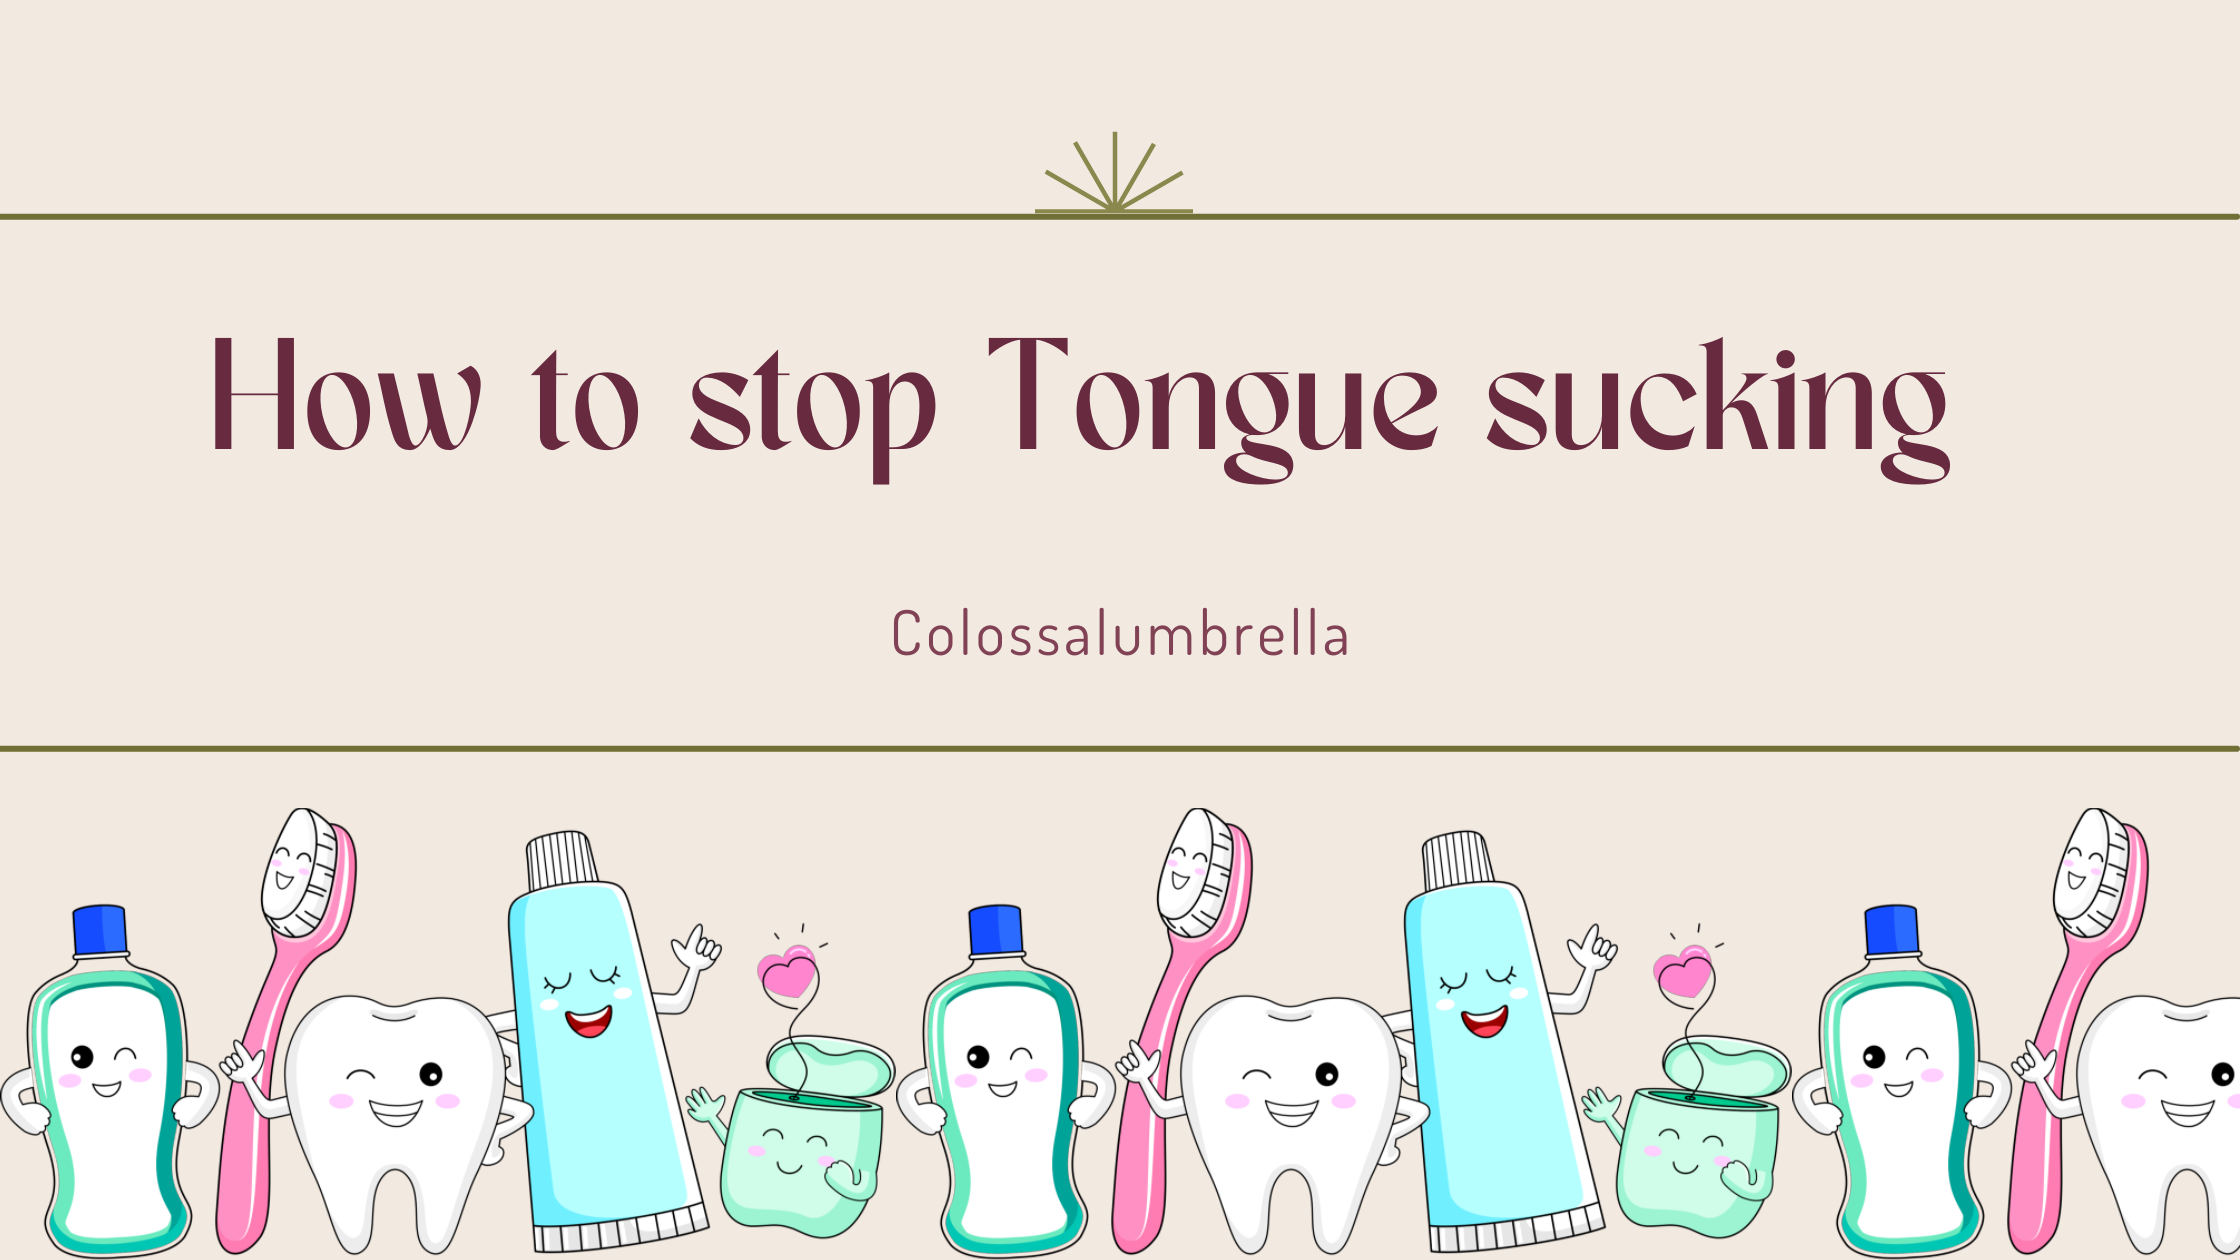 20 Easy to follow tips on how to stop sucking my tongue